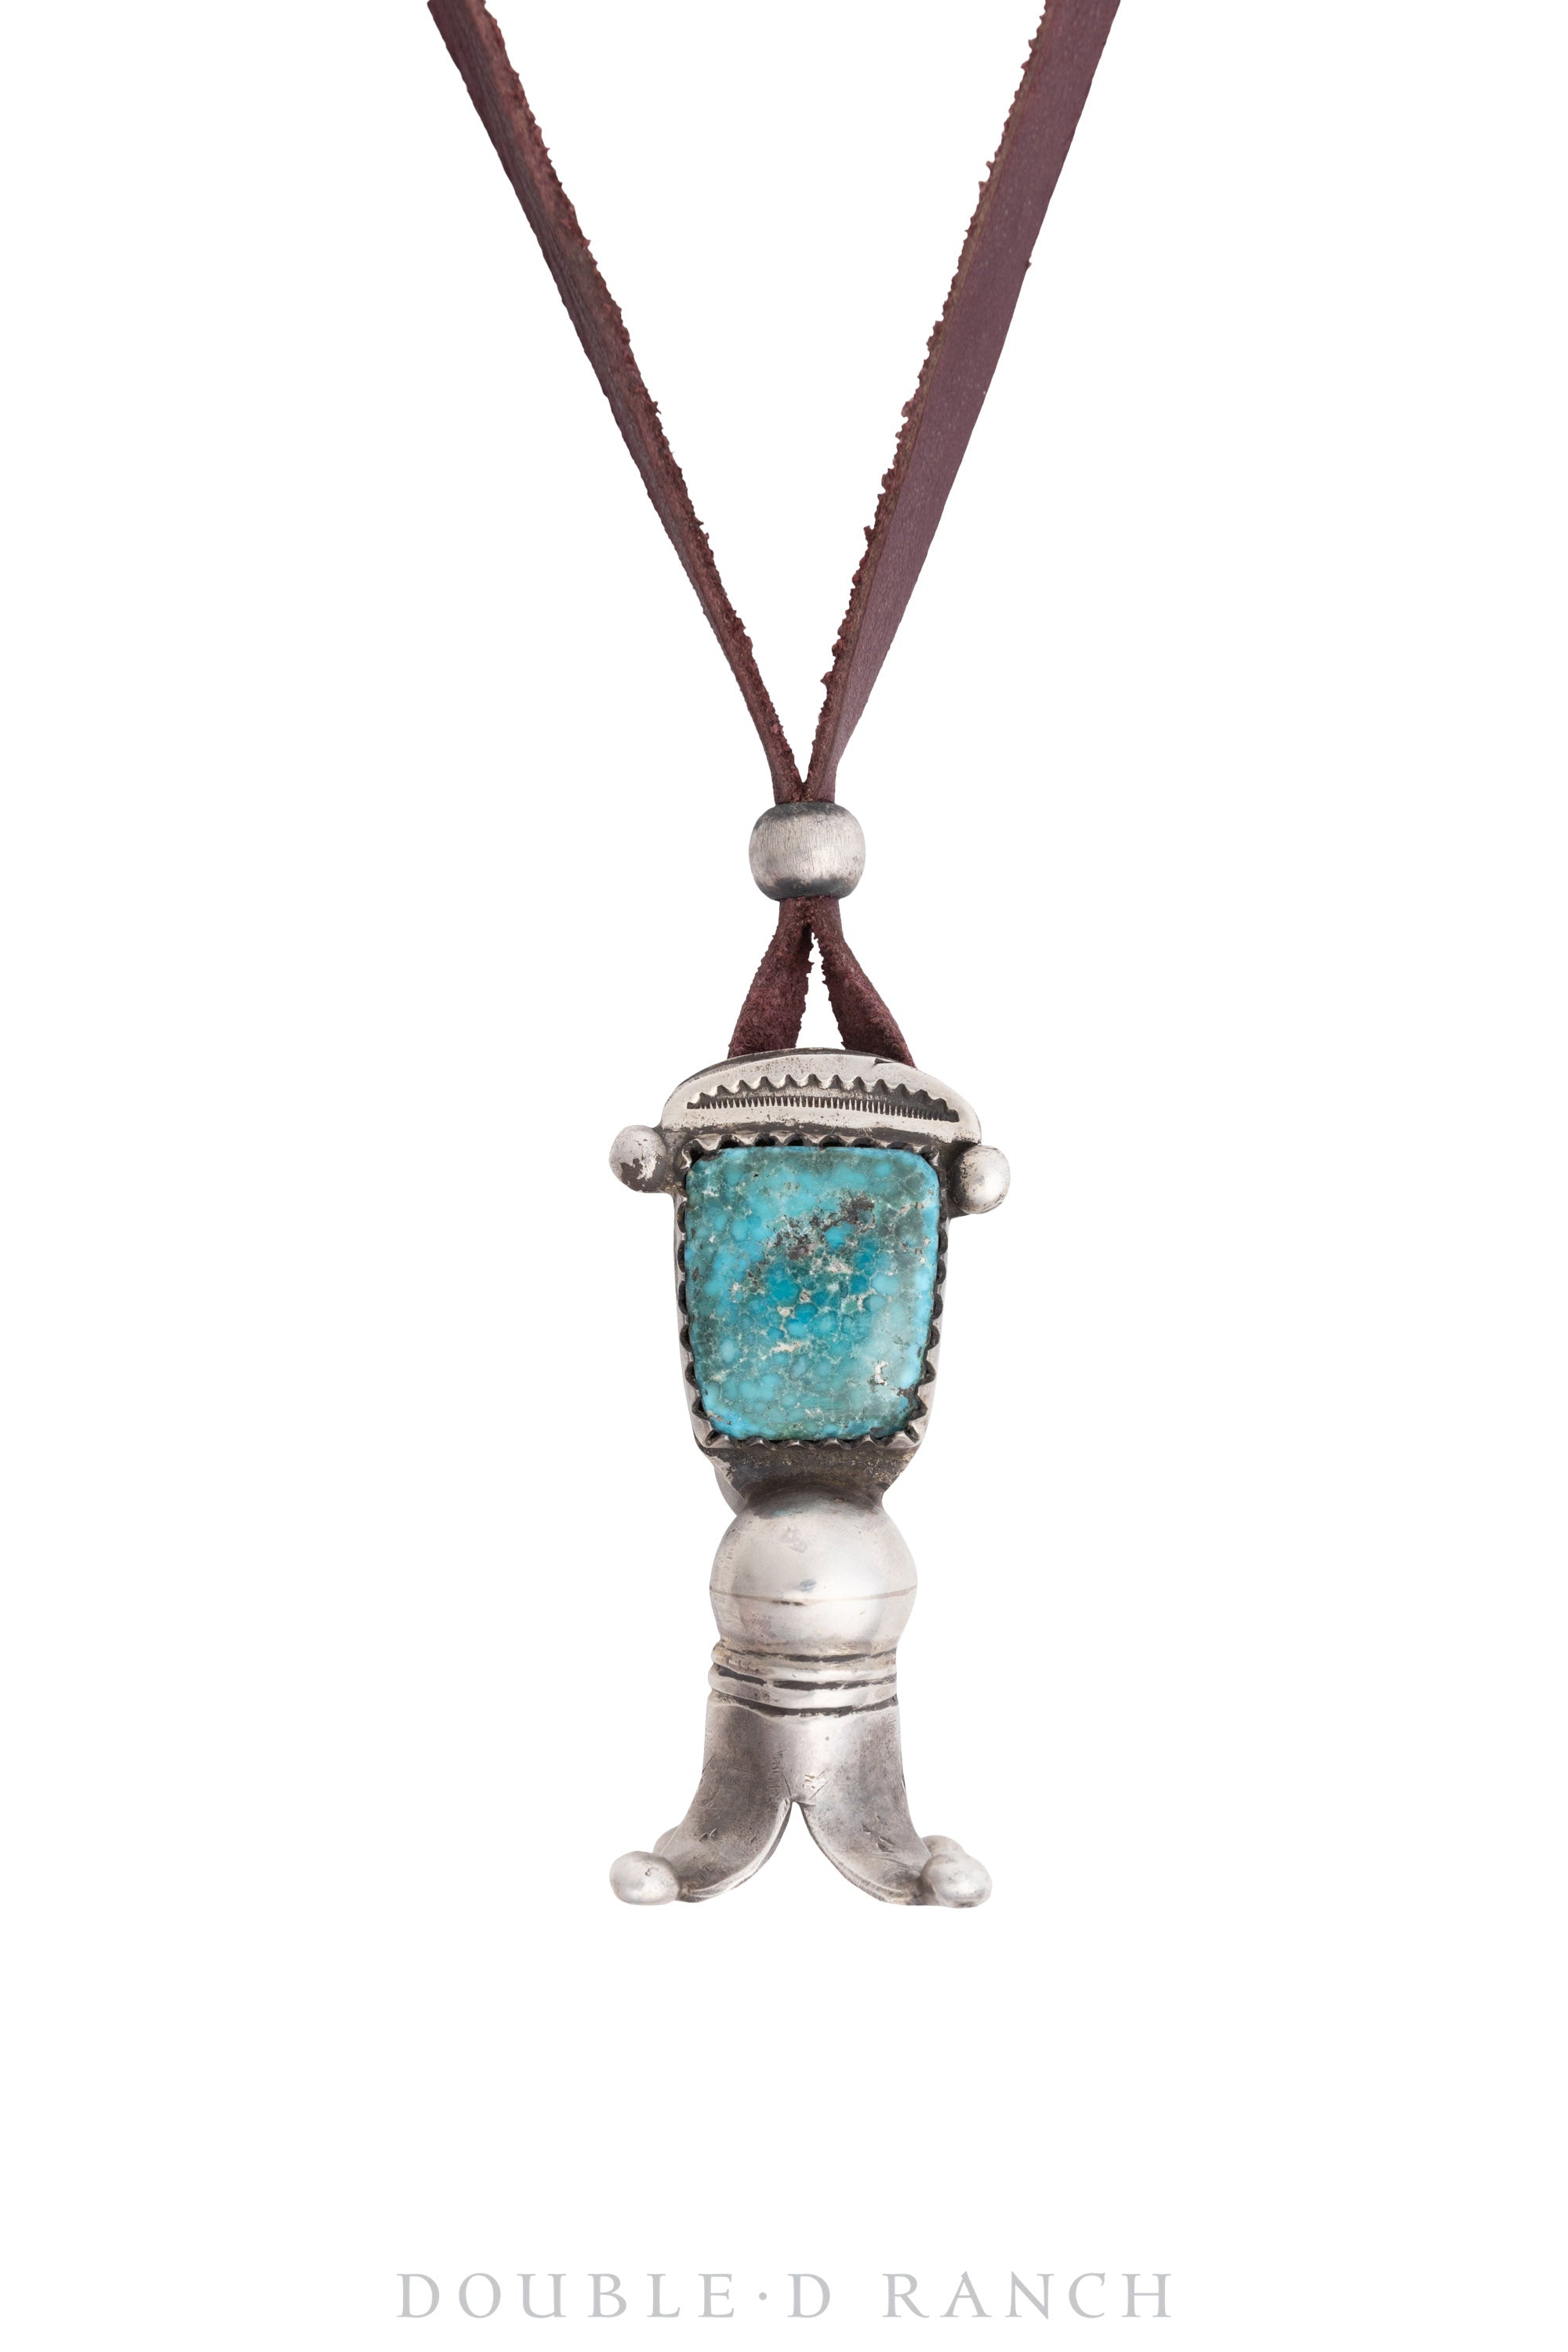 JN2980, Necklace, Leather Thong, Squash Blossom, Turquoise, Artisan, Jock Favour, Contemporary, 2980